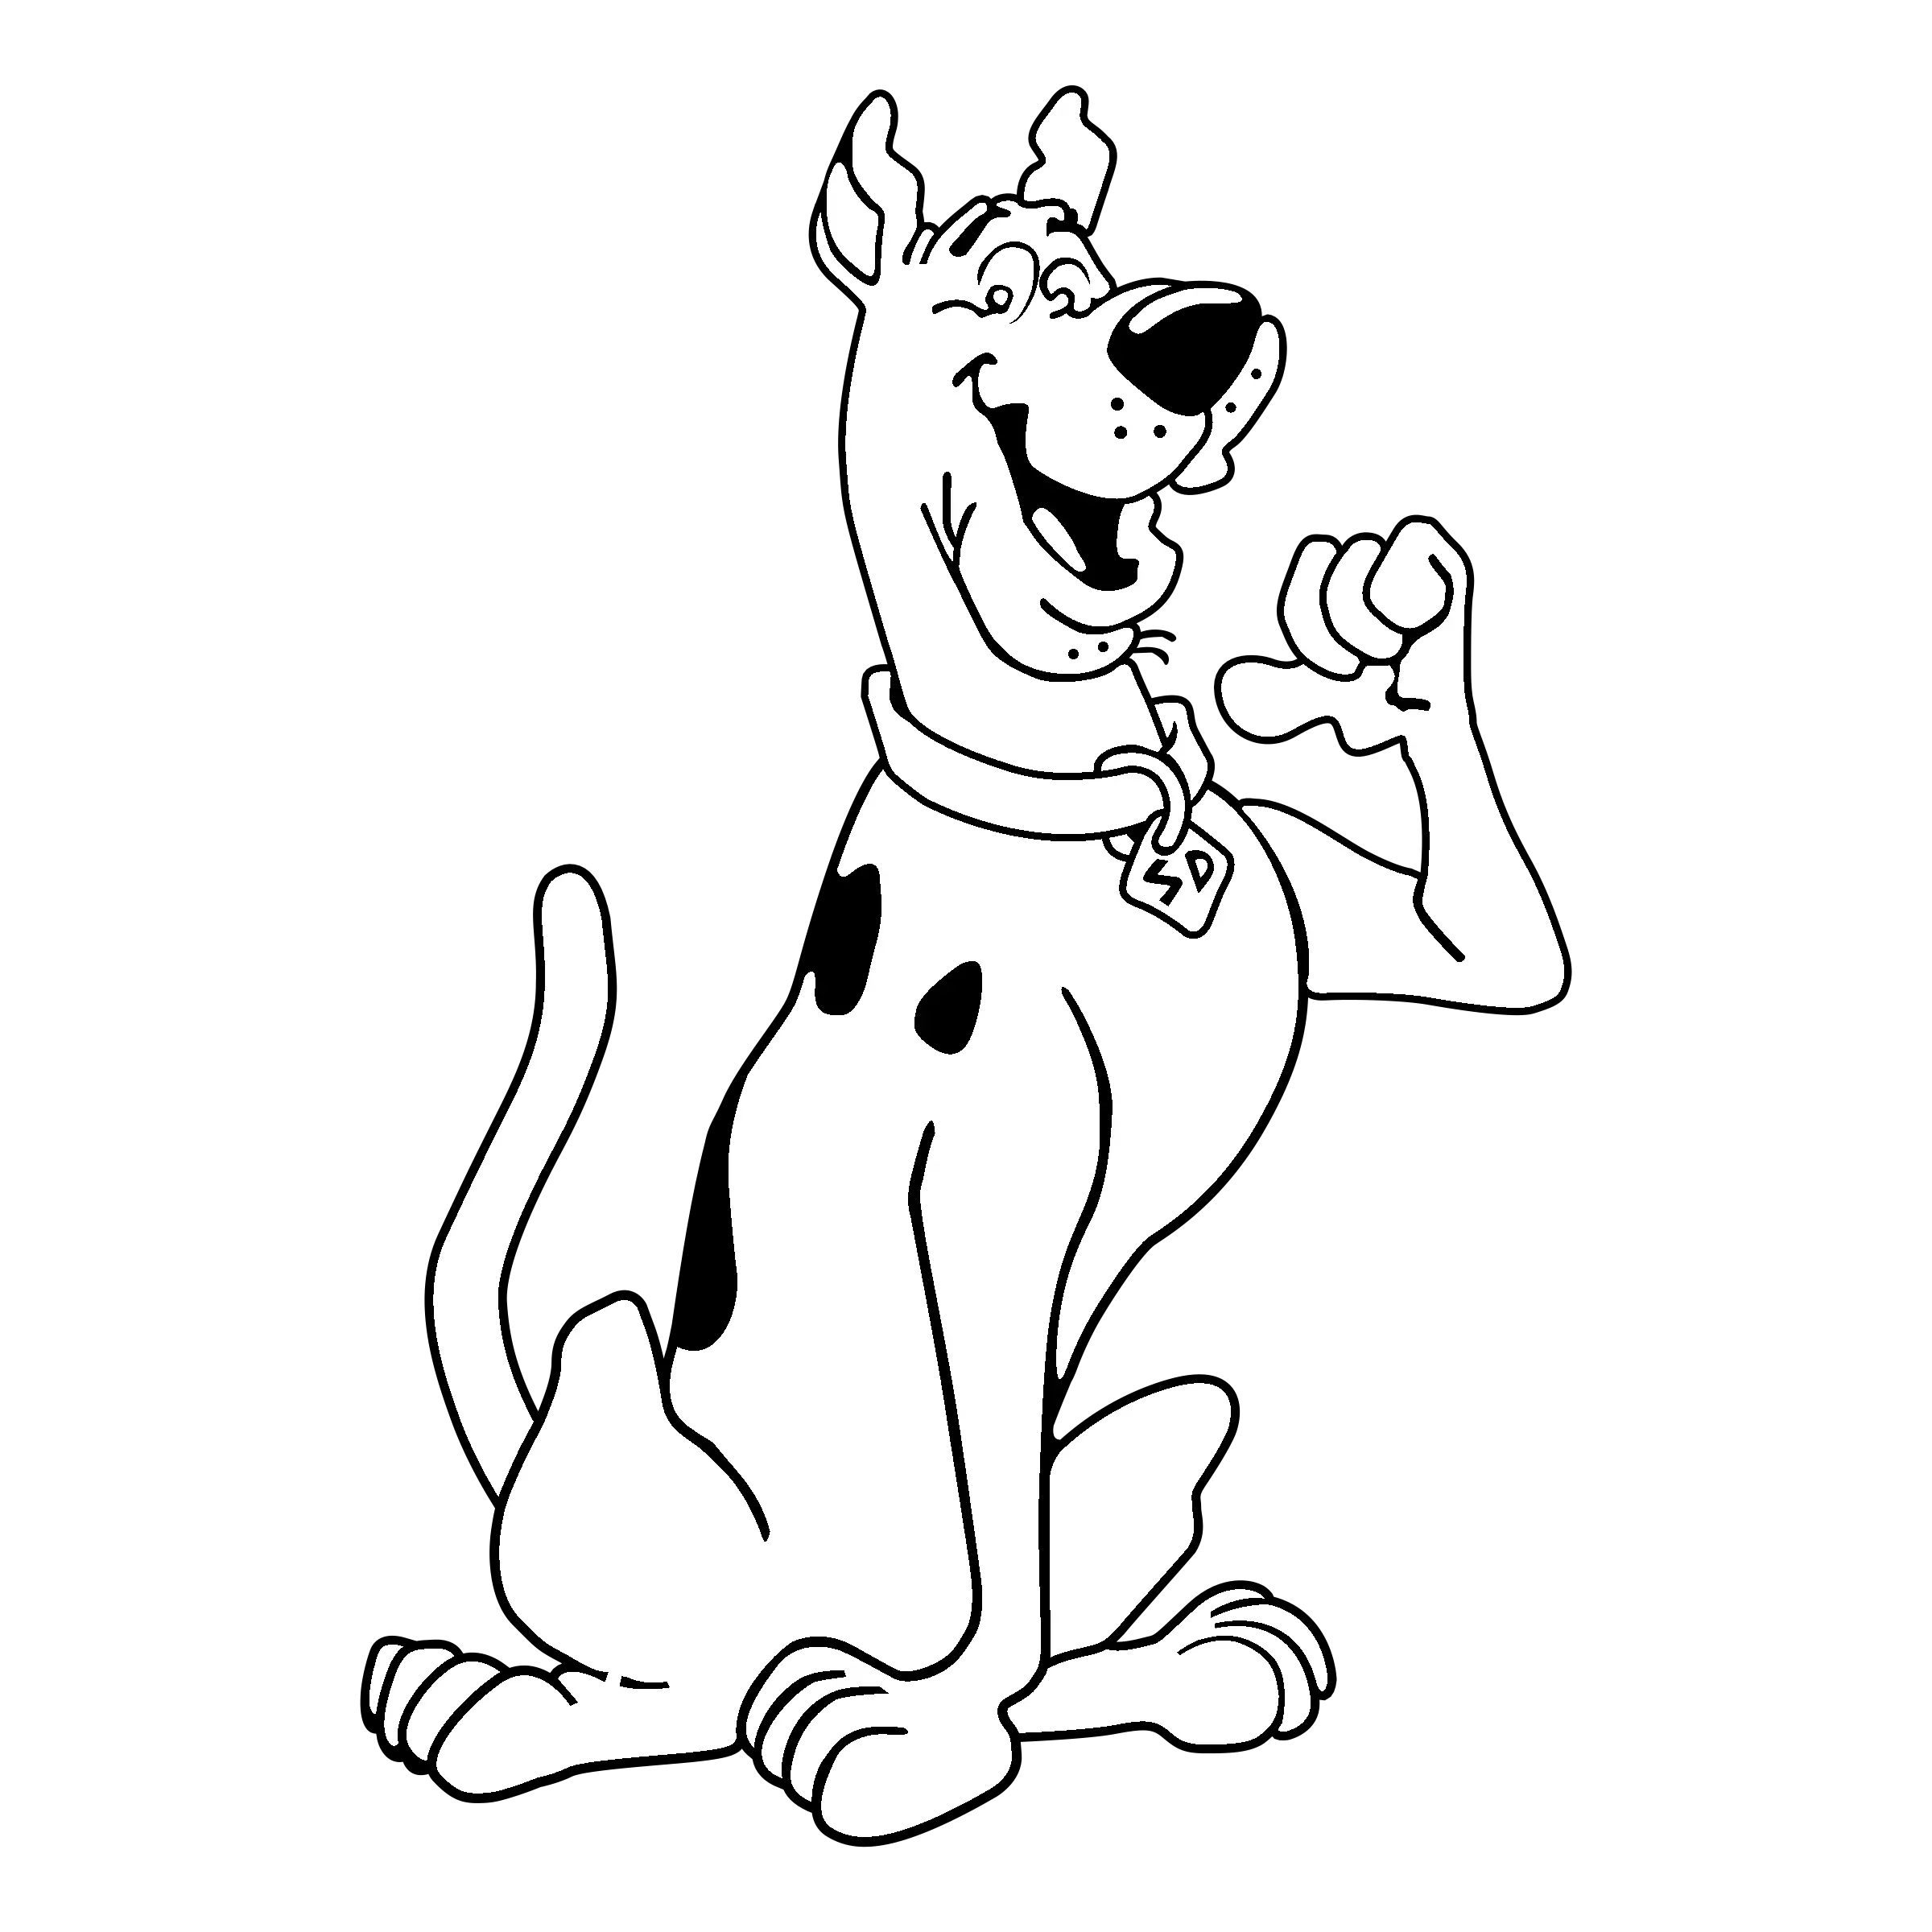 Download Scooby Doo Logo Black And Black And White Scooby Doo Png Scooby Doo Png